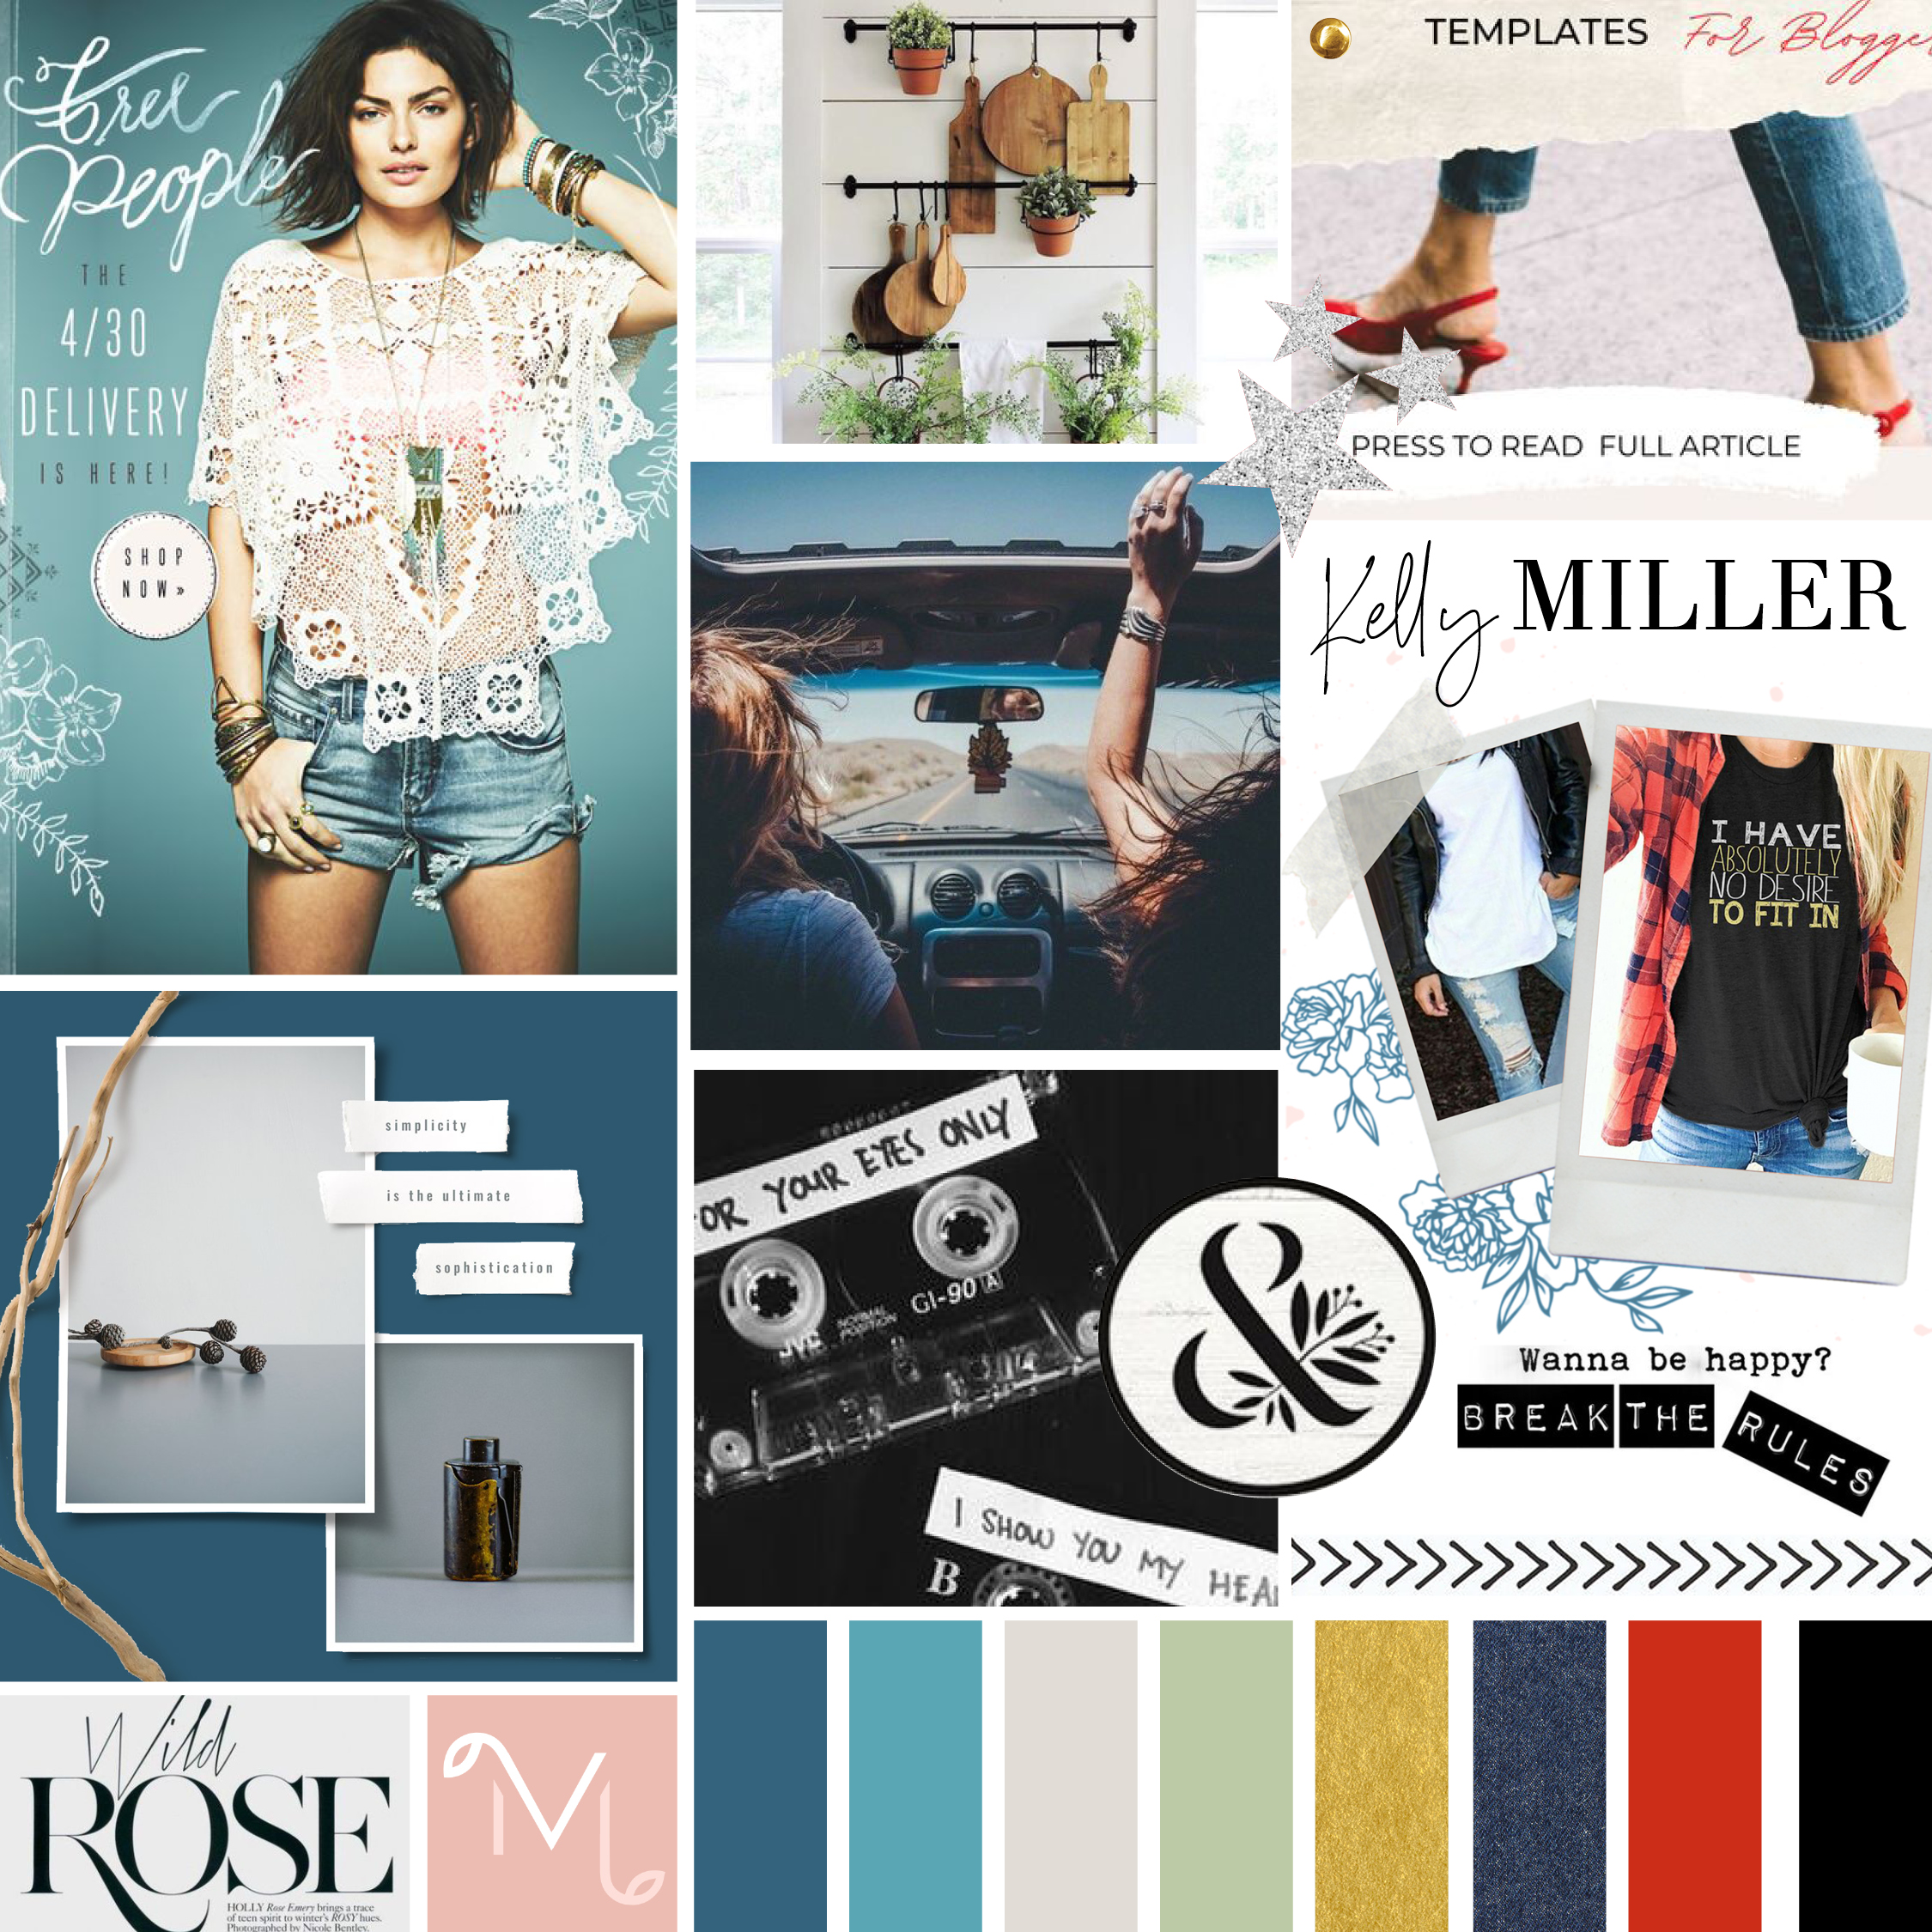 Boho chic & edgy mood board for business coach, Kelly Miller